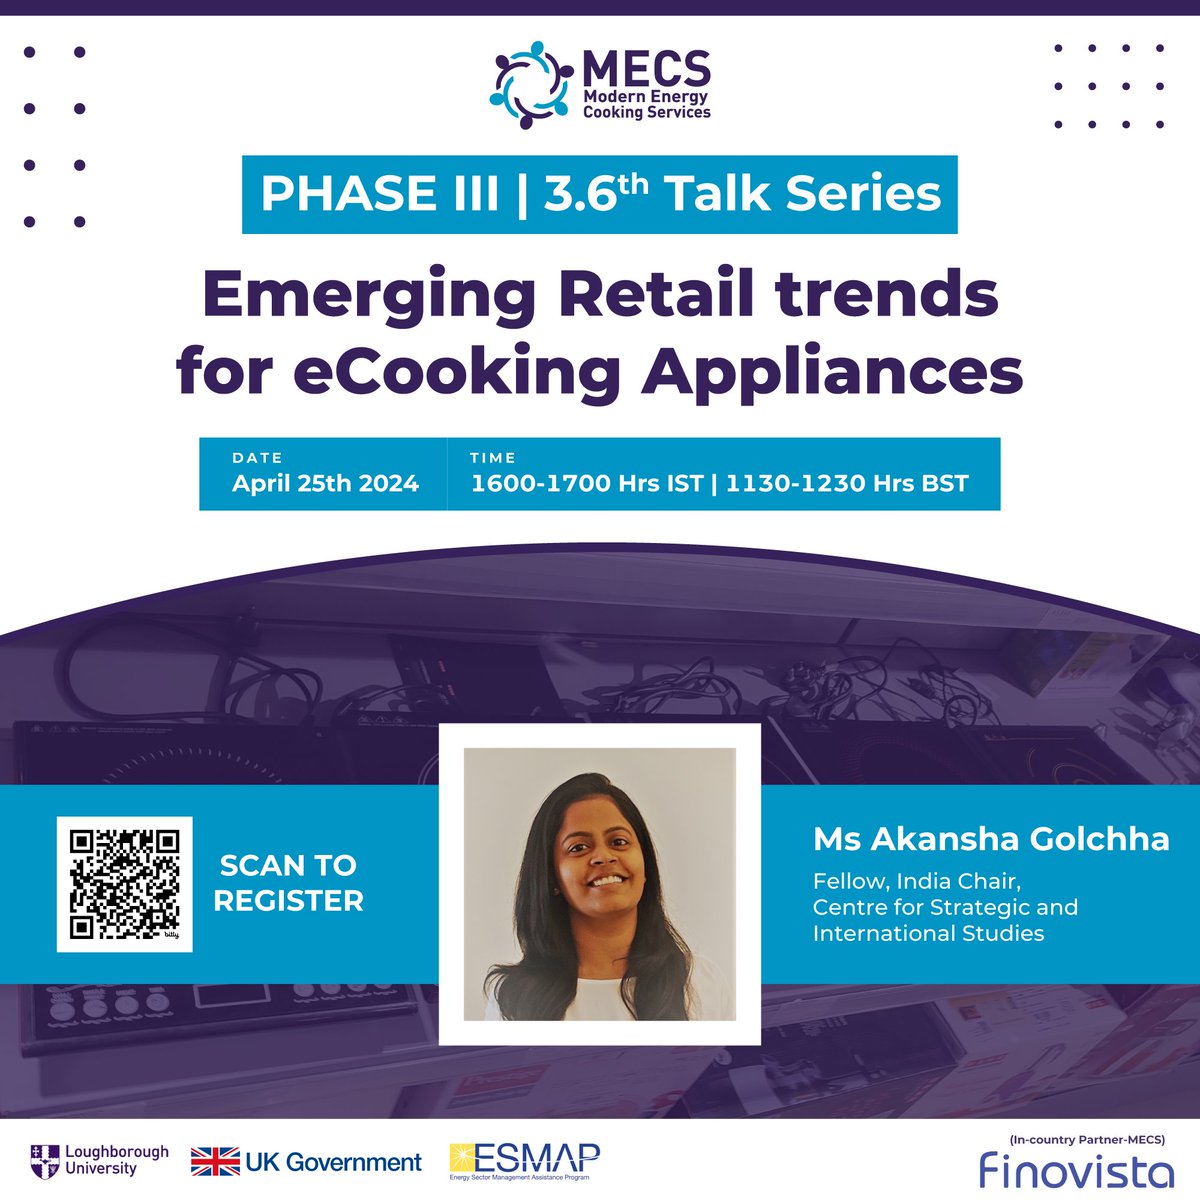 Meet our speaker Ms Akansha Golchha, as a distinguished panelist in our #6thTalkSeries, Phase III on the theme 'Emerging Retail trends for eCooking Appliances' at 1600 Hrs IST/1130 Hrs BST on 25-04-24. ✨ Register: bit.ly/467sMne #CleanEnergy #ecooking #cleancooking